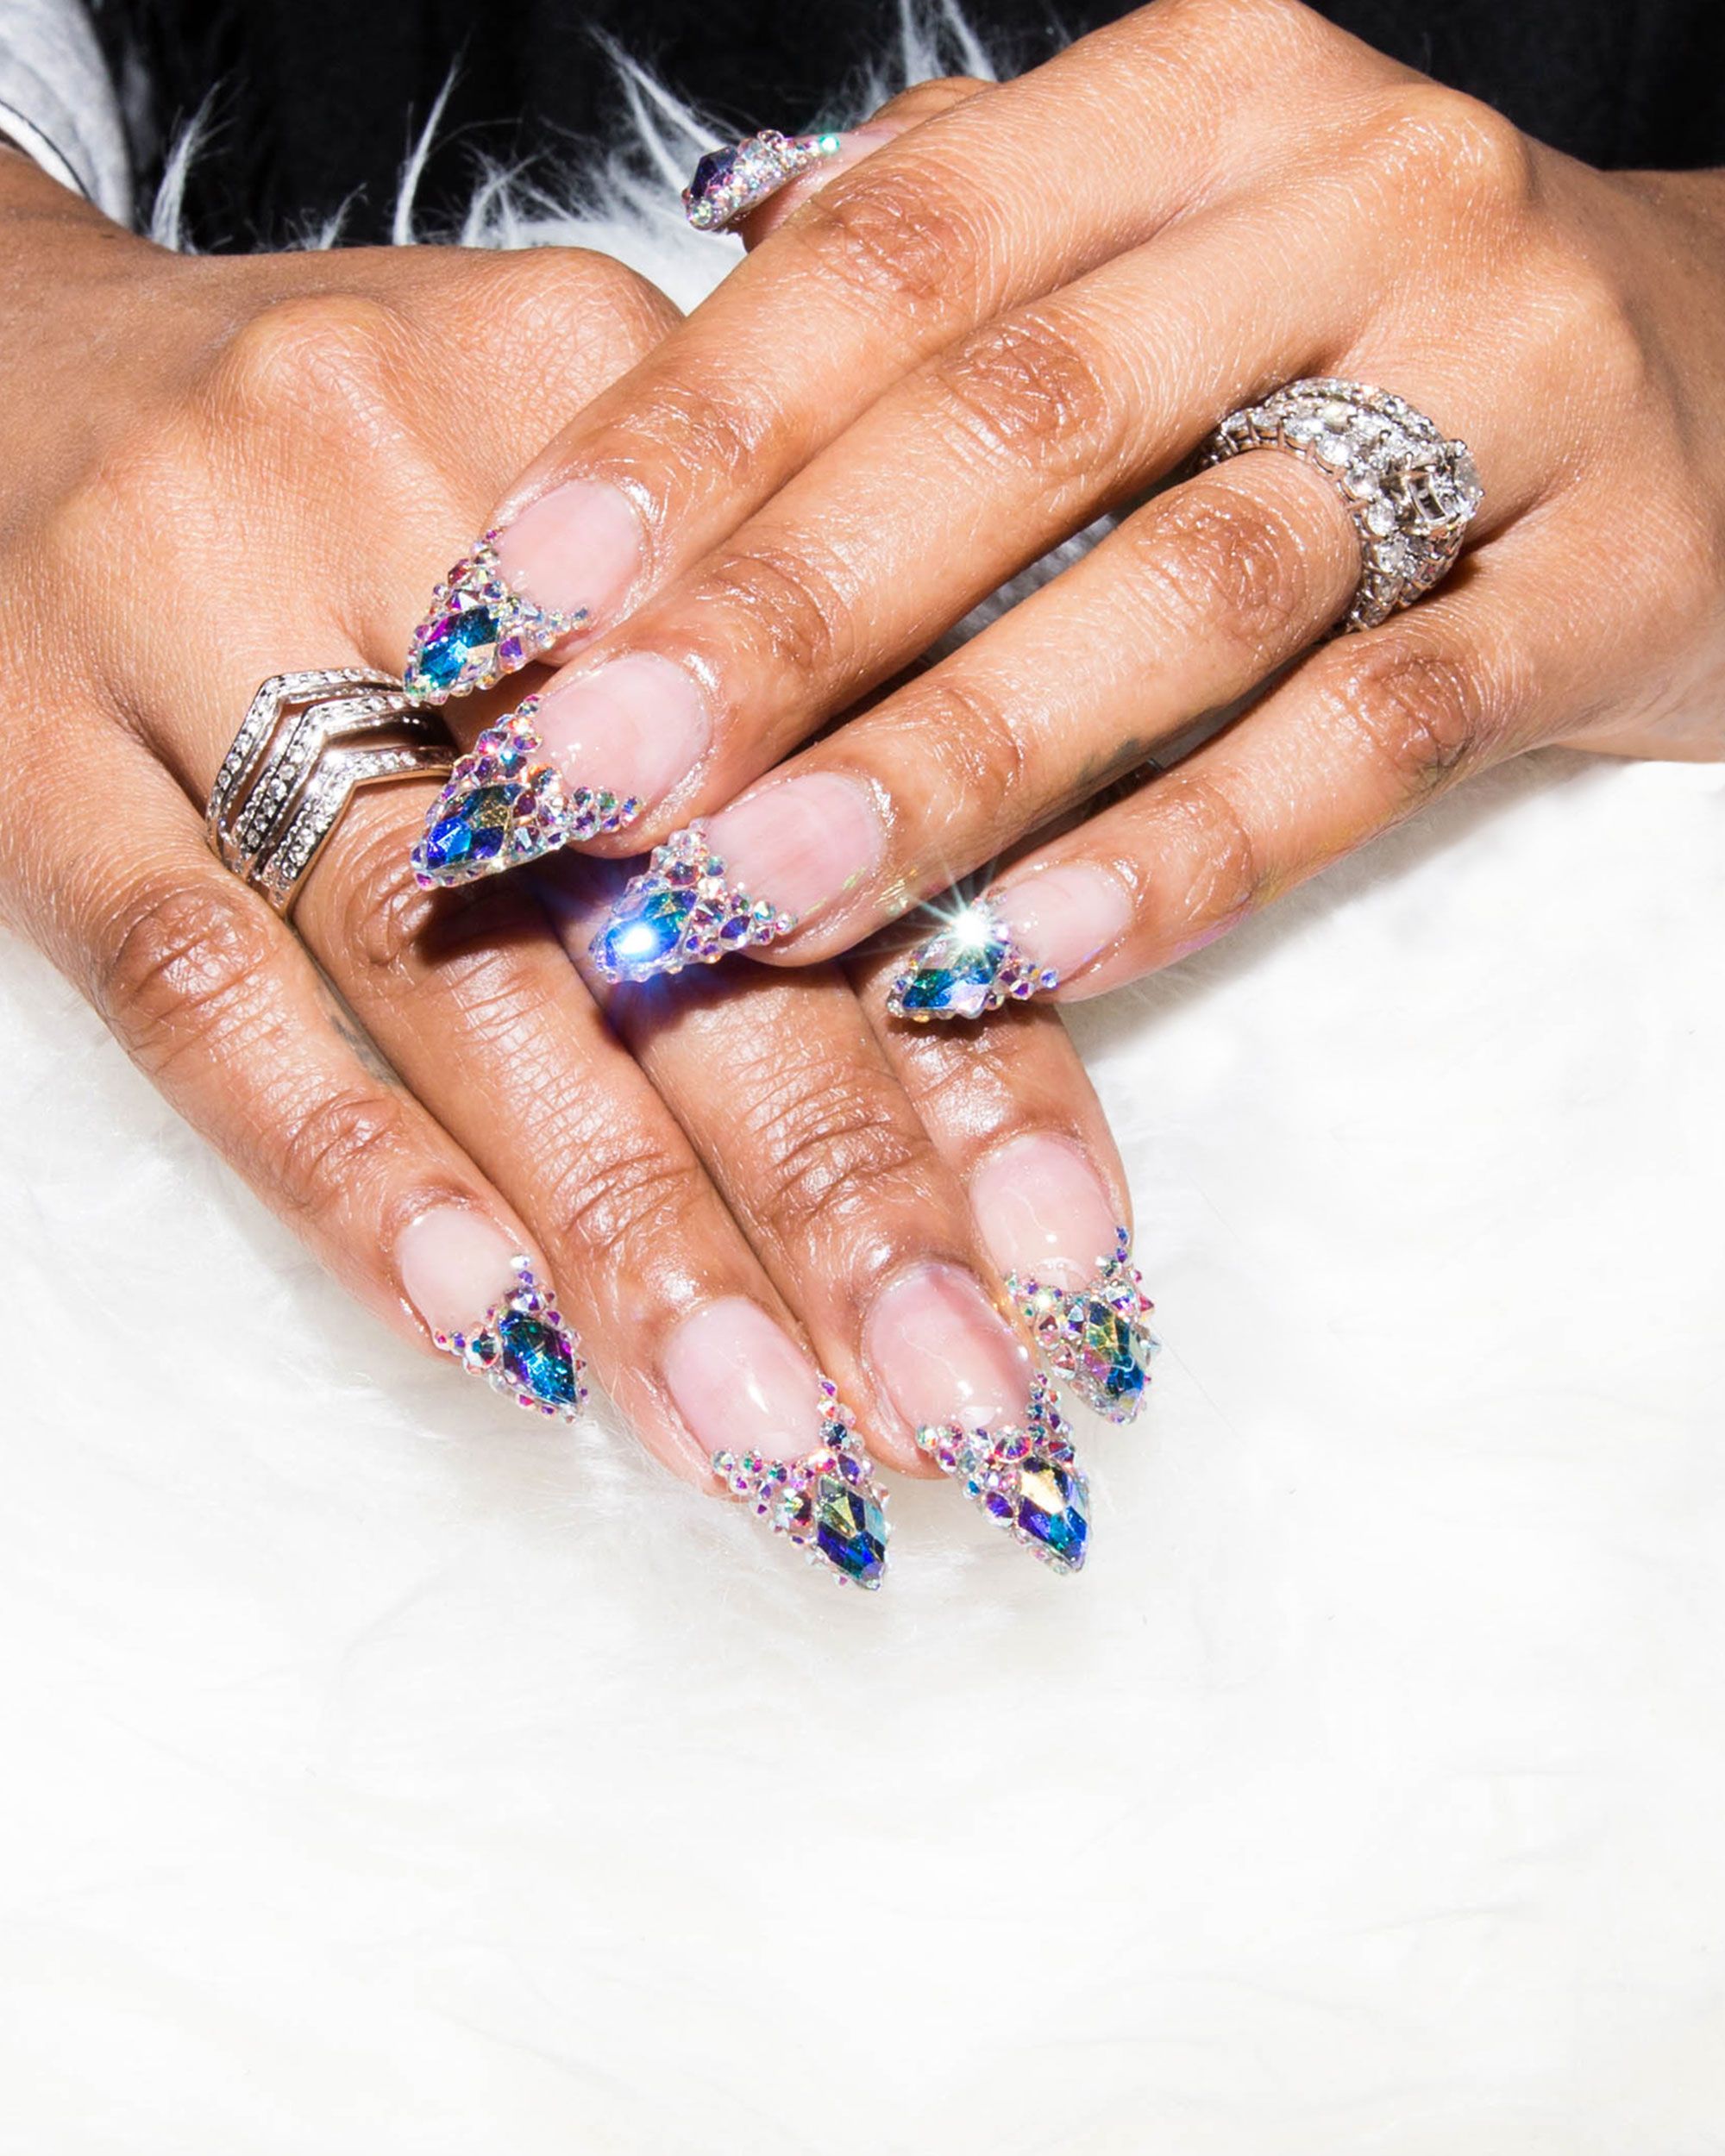 Who Does Cardi B's Nails?, Jenny Bui Interview